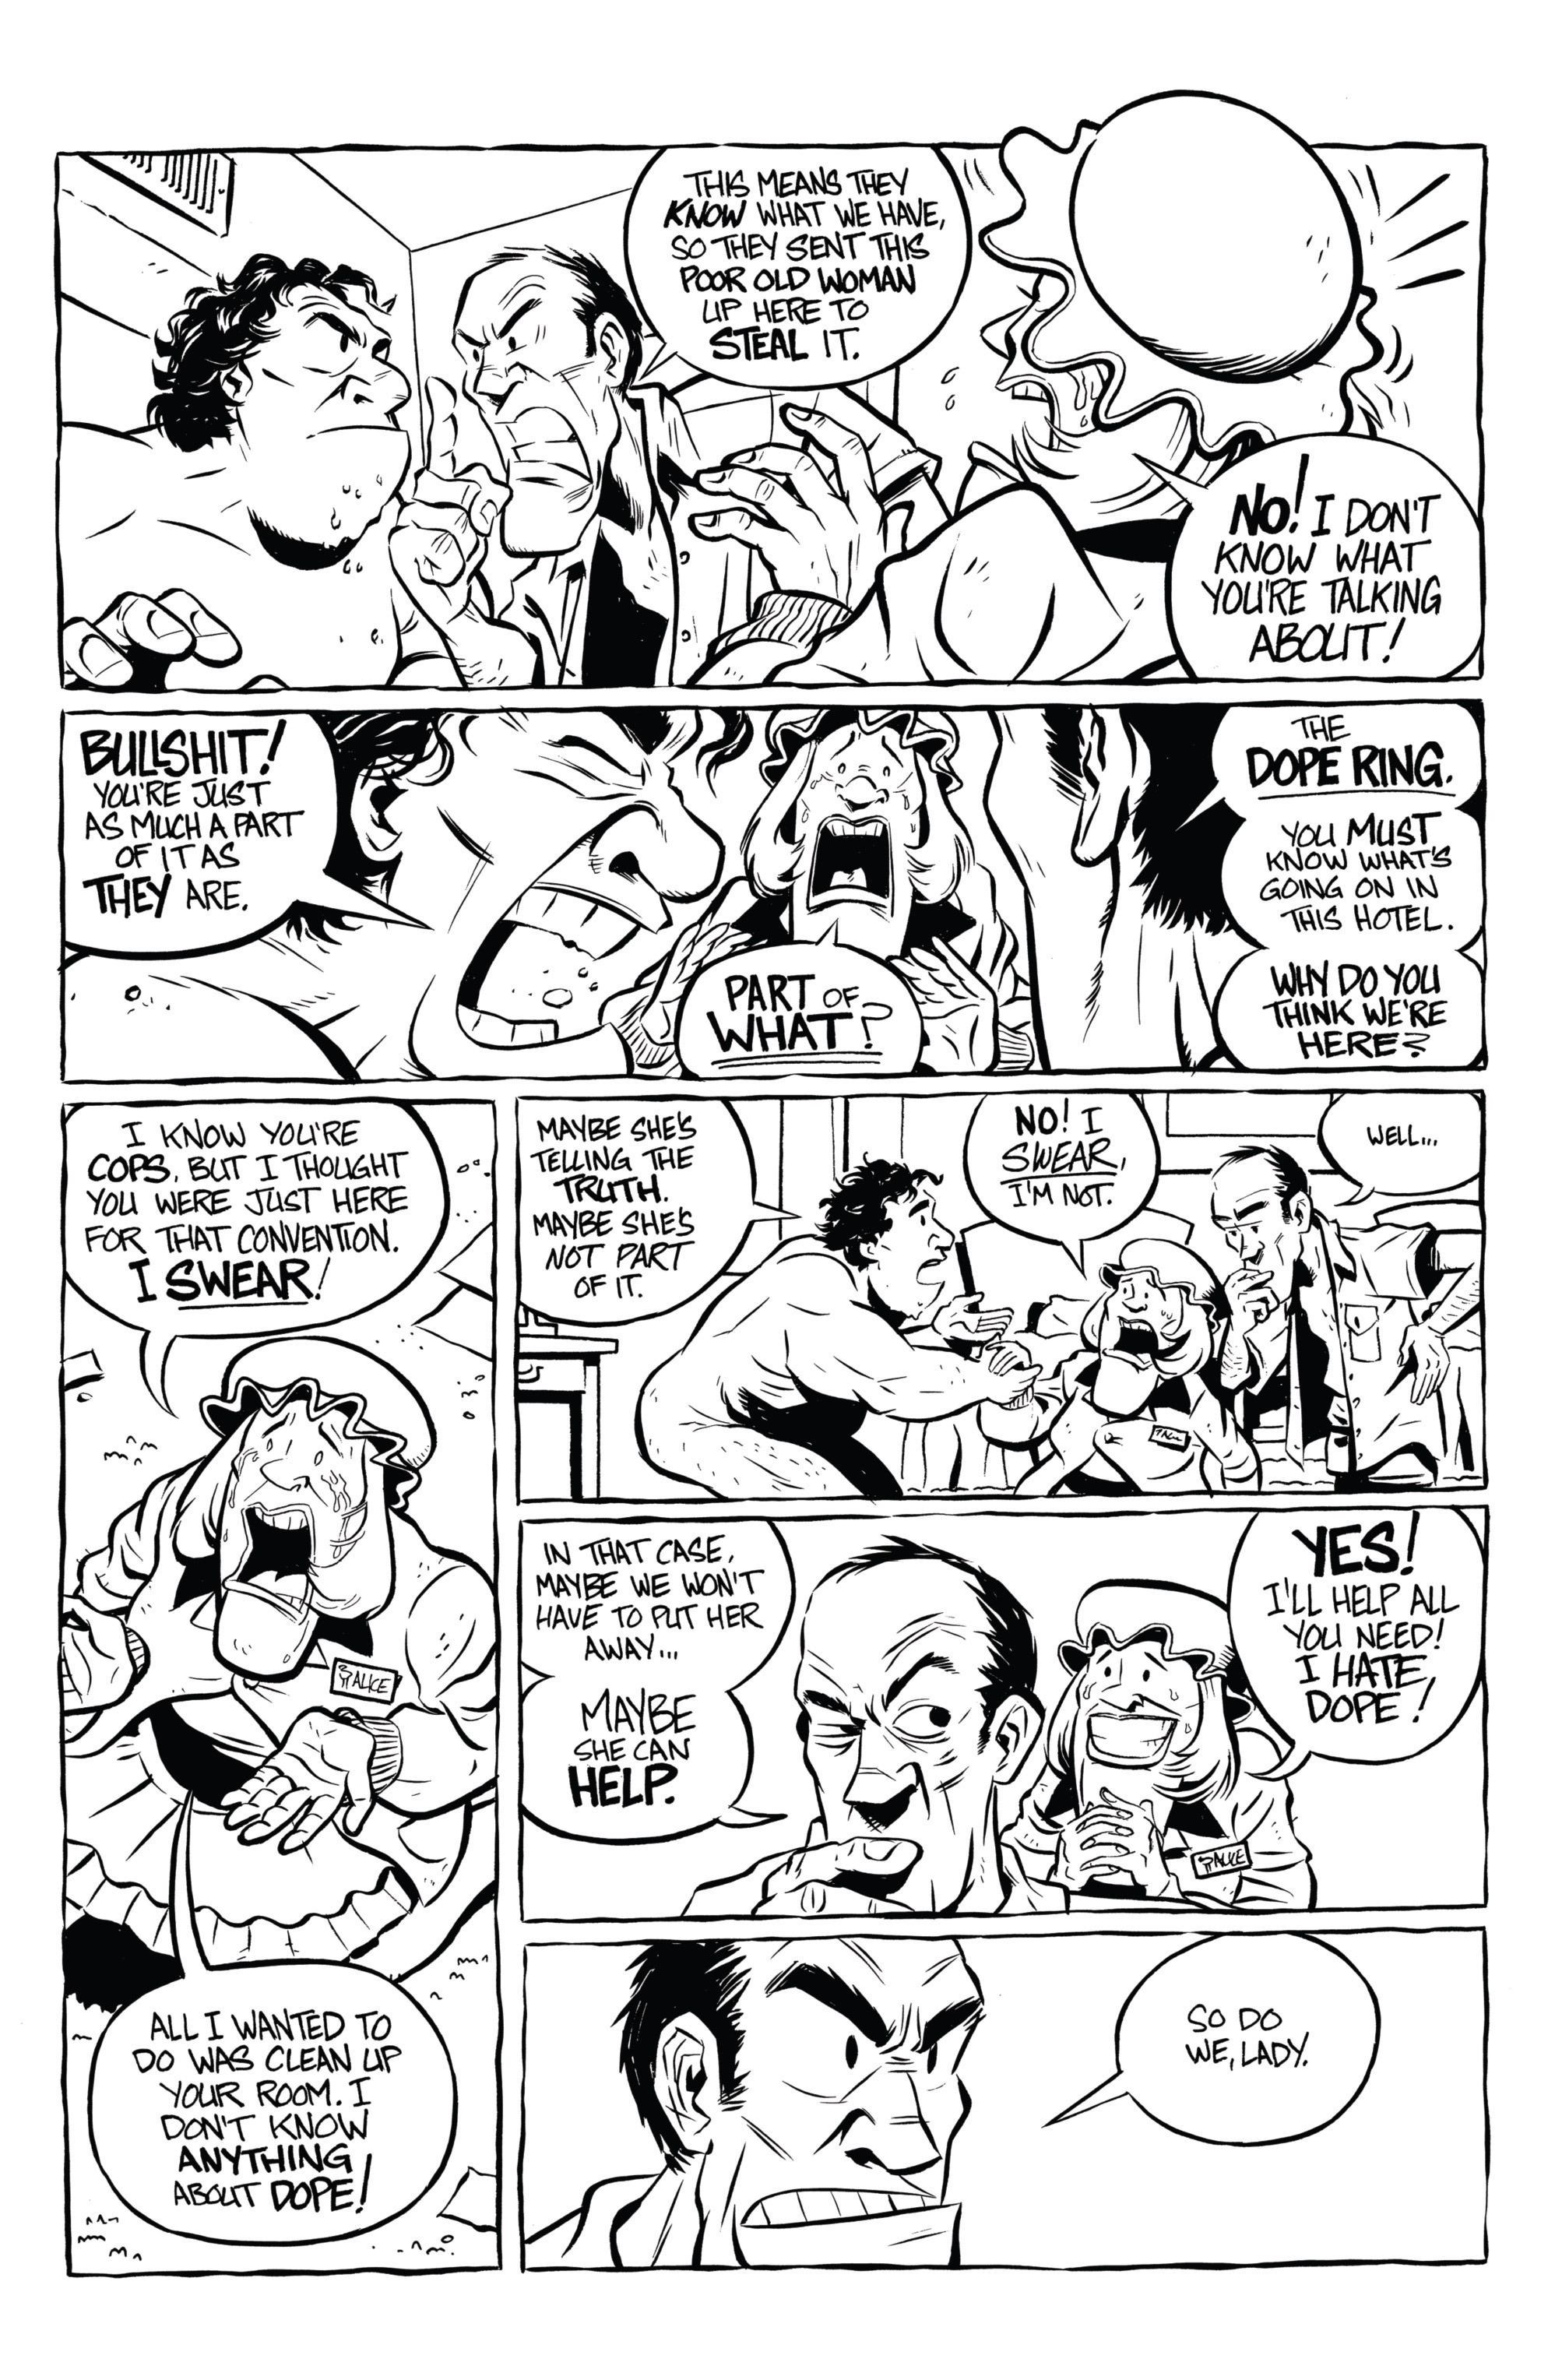 Read online Hunter S. Thompson's Fear and Loathing in Las Vegas comic -  Issue #4 - 30